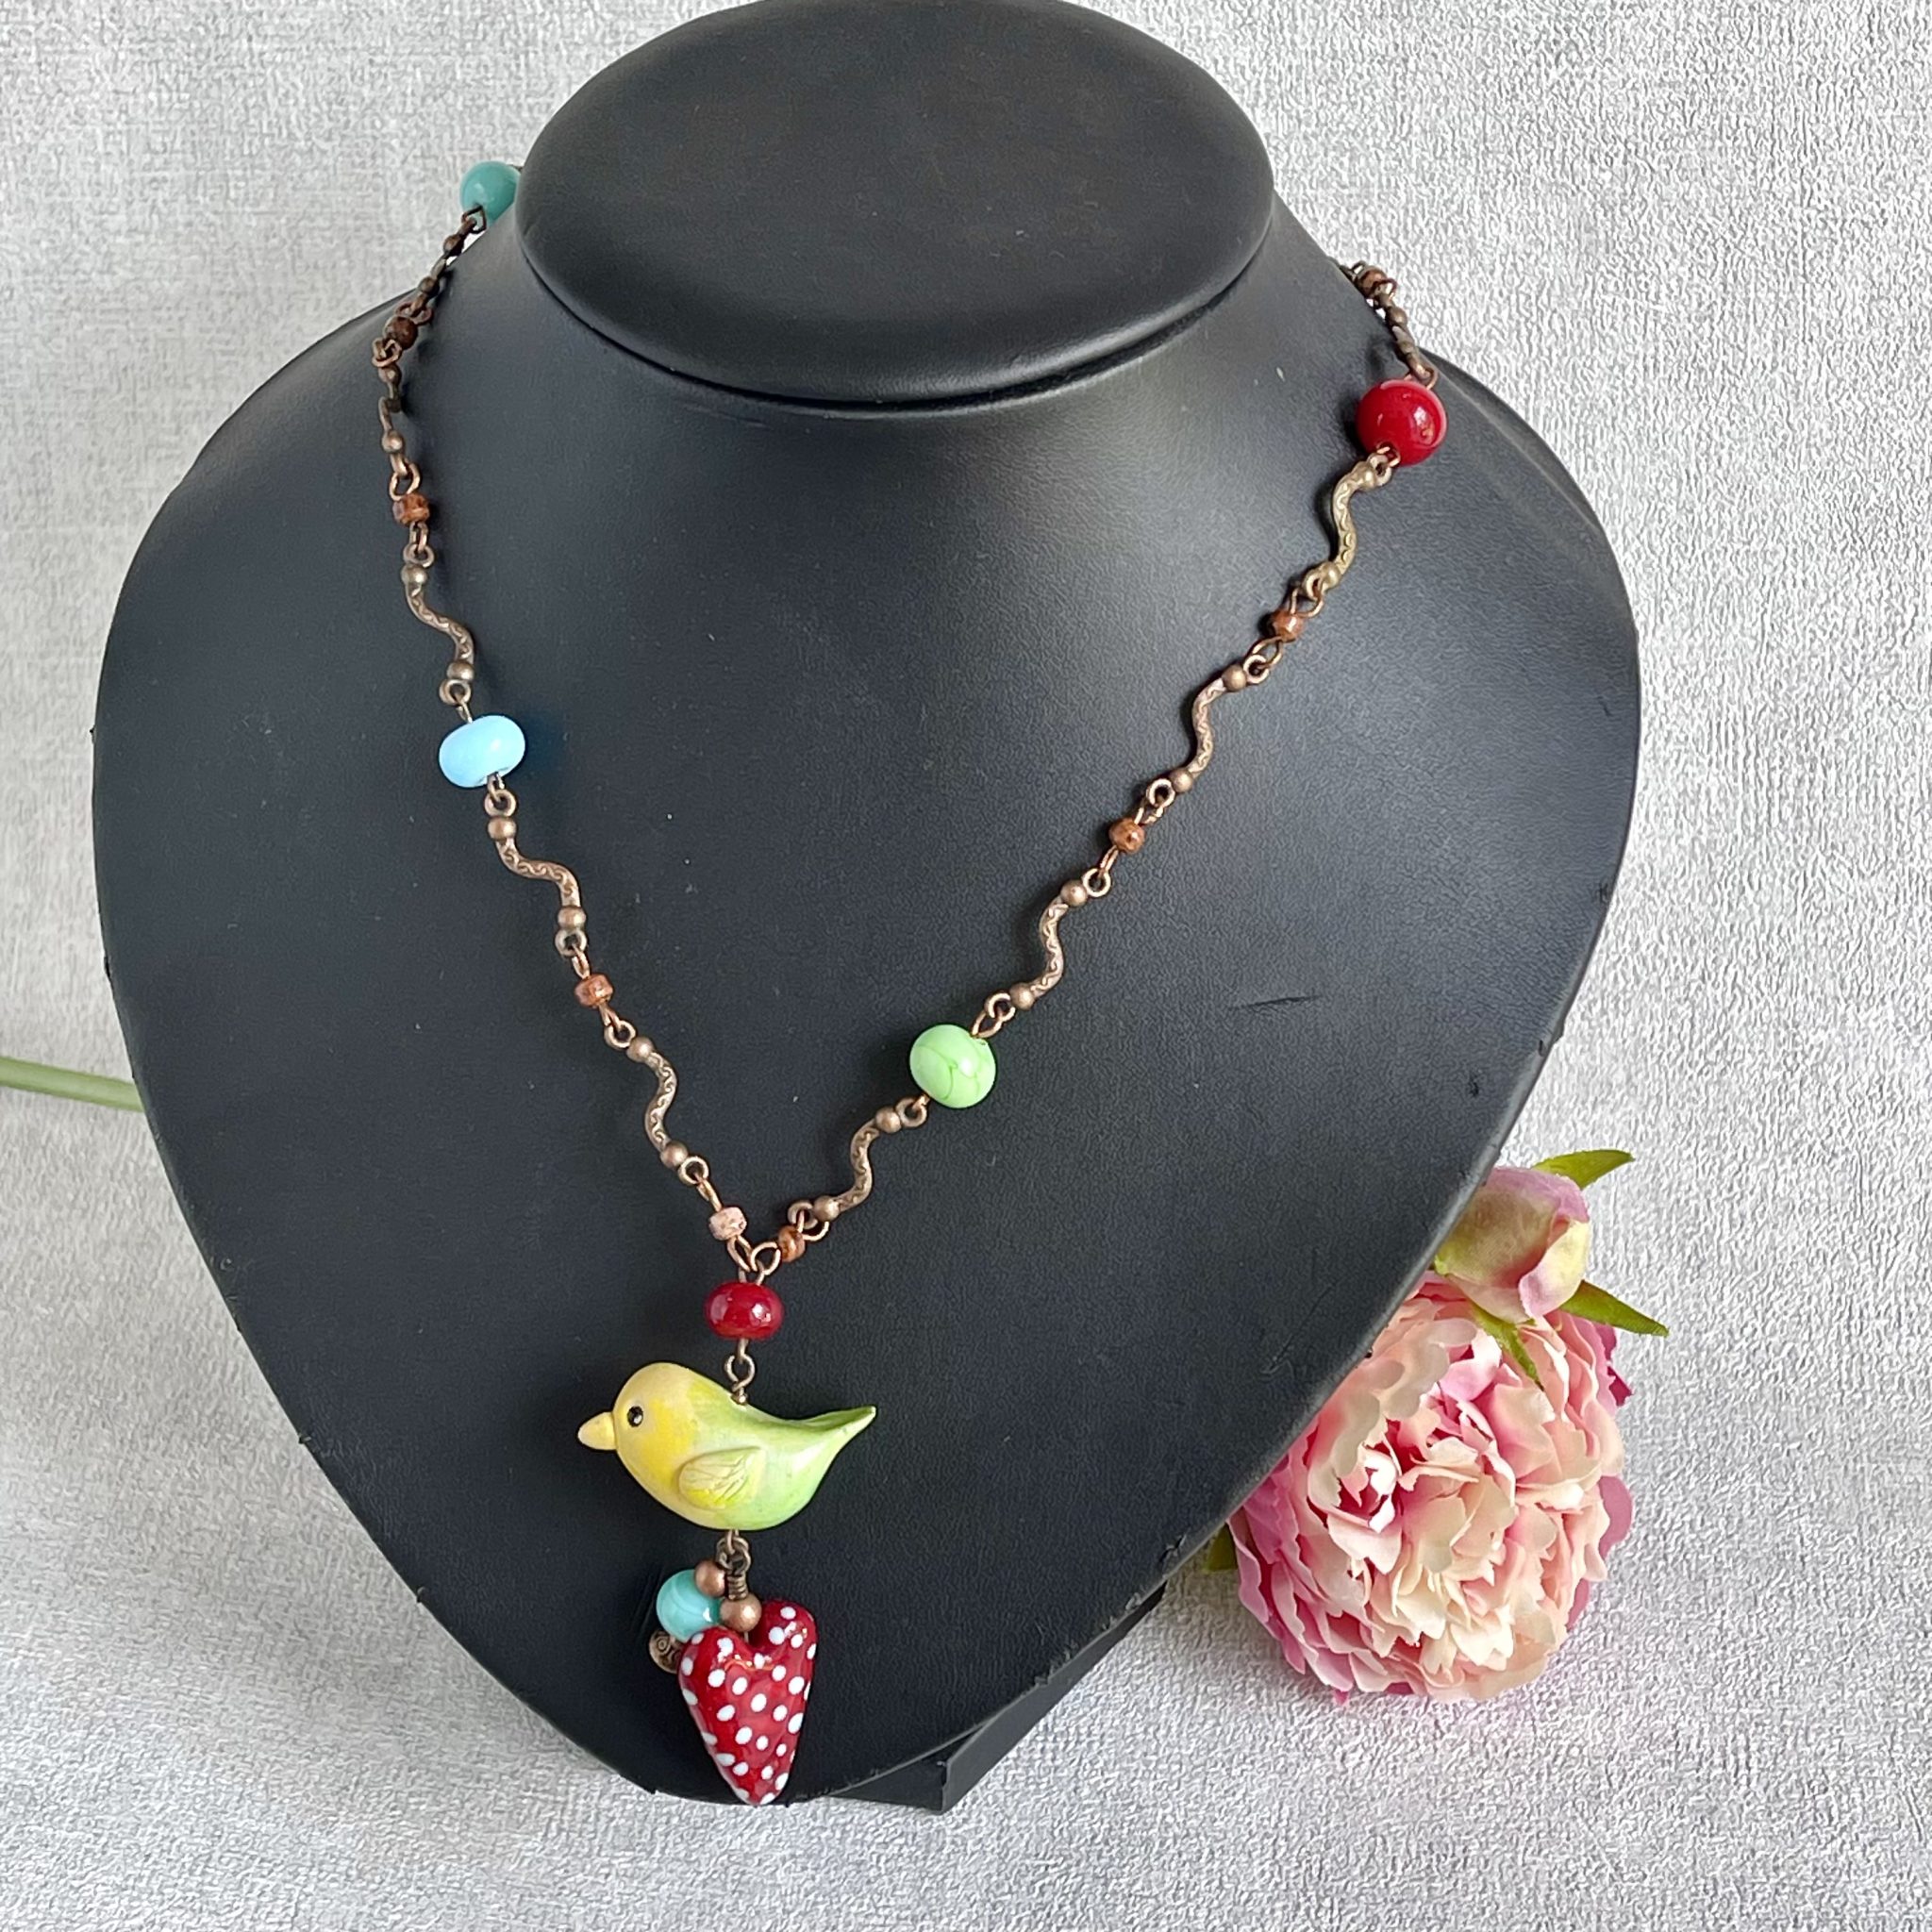 Polymer clay rustic bird and glass heart necklace for girl - Hand Crafted OOAK jewelry